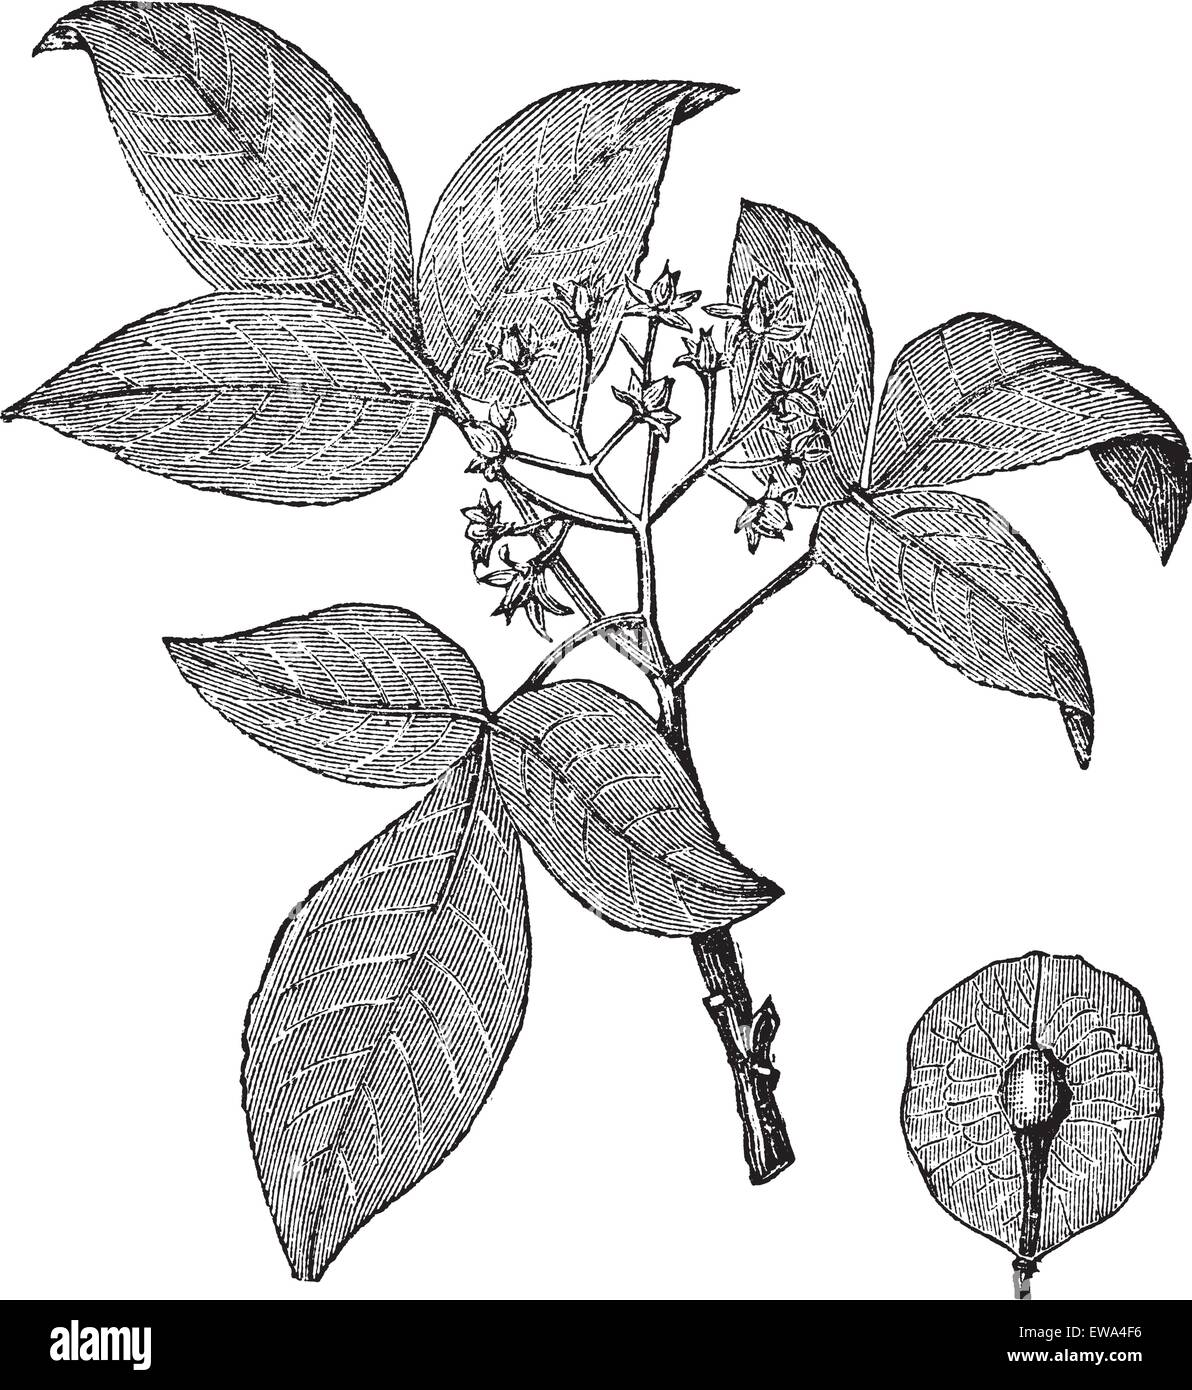 Hoptree or Ptelea trifoliata or Wafer Ash, vintage engraving. Old engraved illustration of Hoptree isolated on a white background. Stock Vector